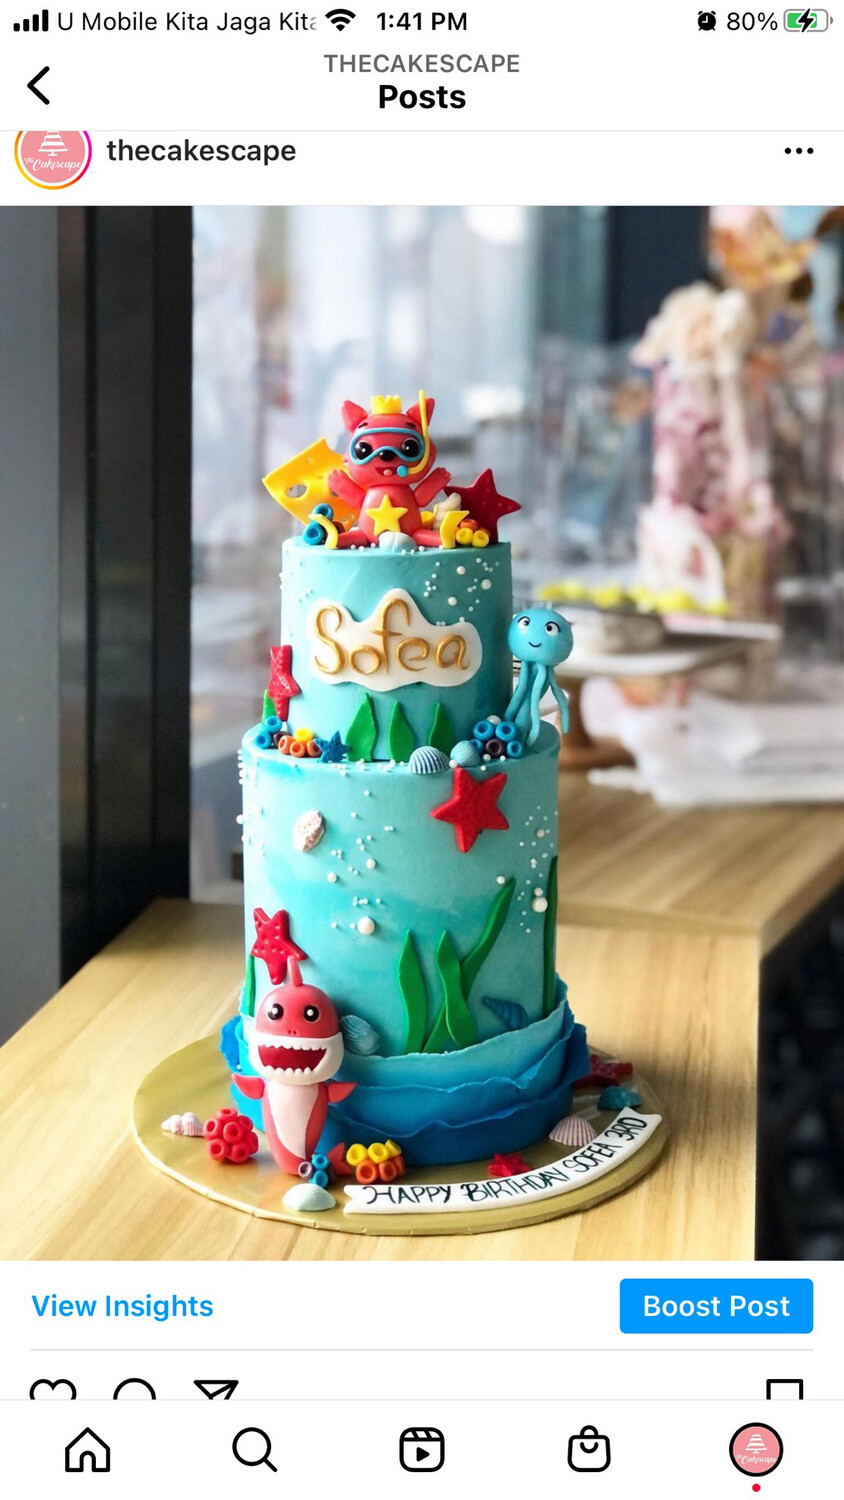 Baby Shark Cake Pinkfong In 2 Or 3 Tiers